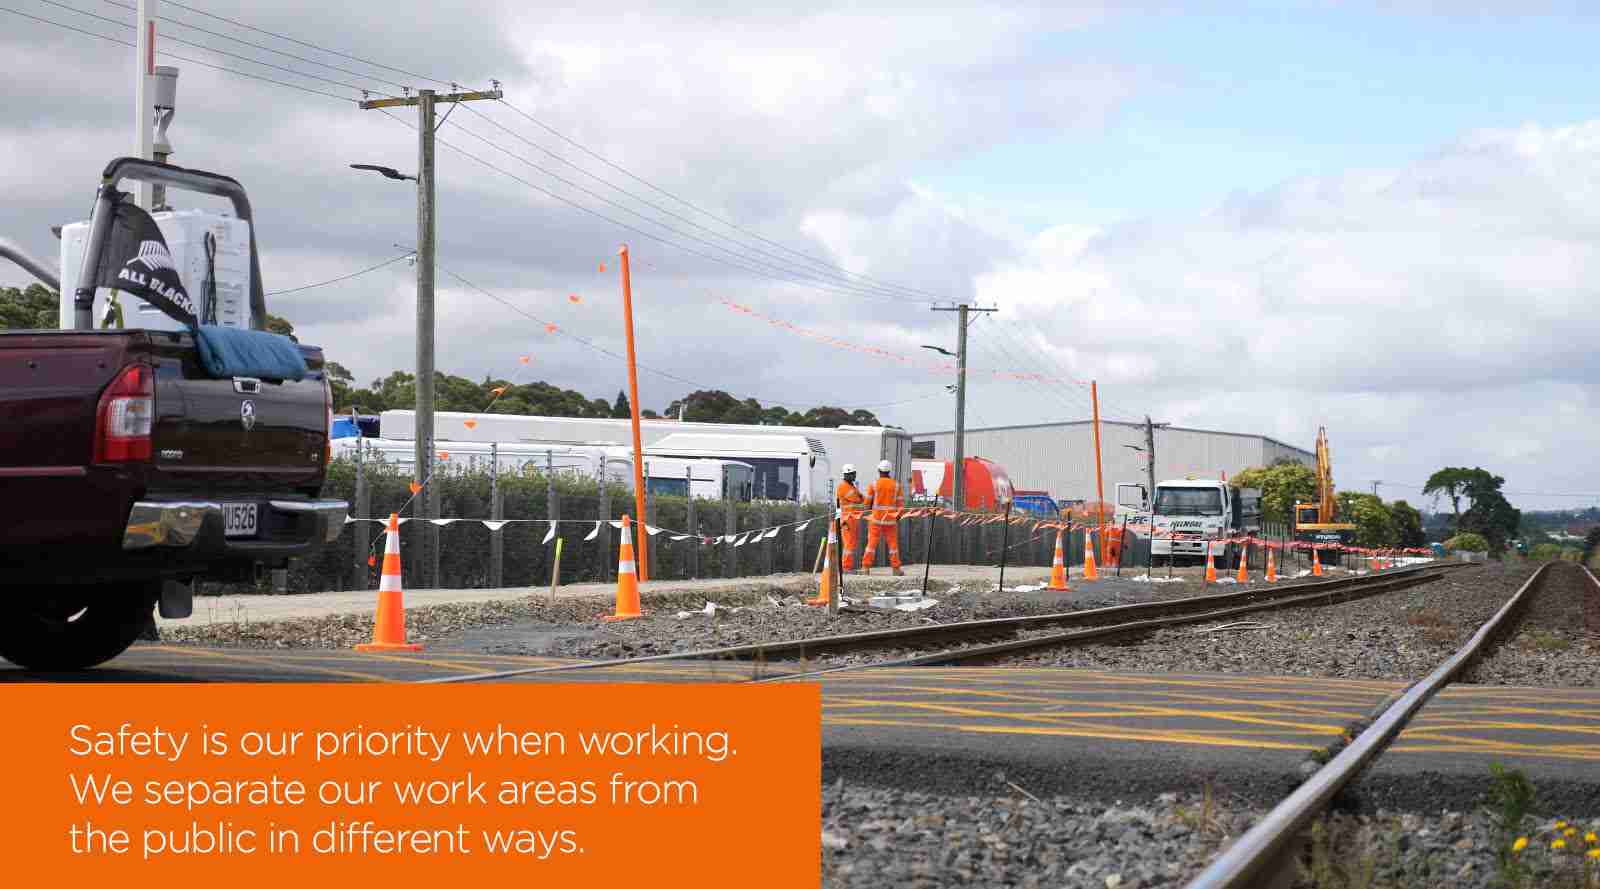 Upgrading safety at level crossings